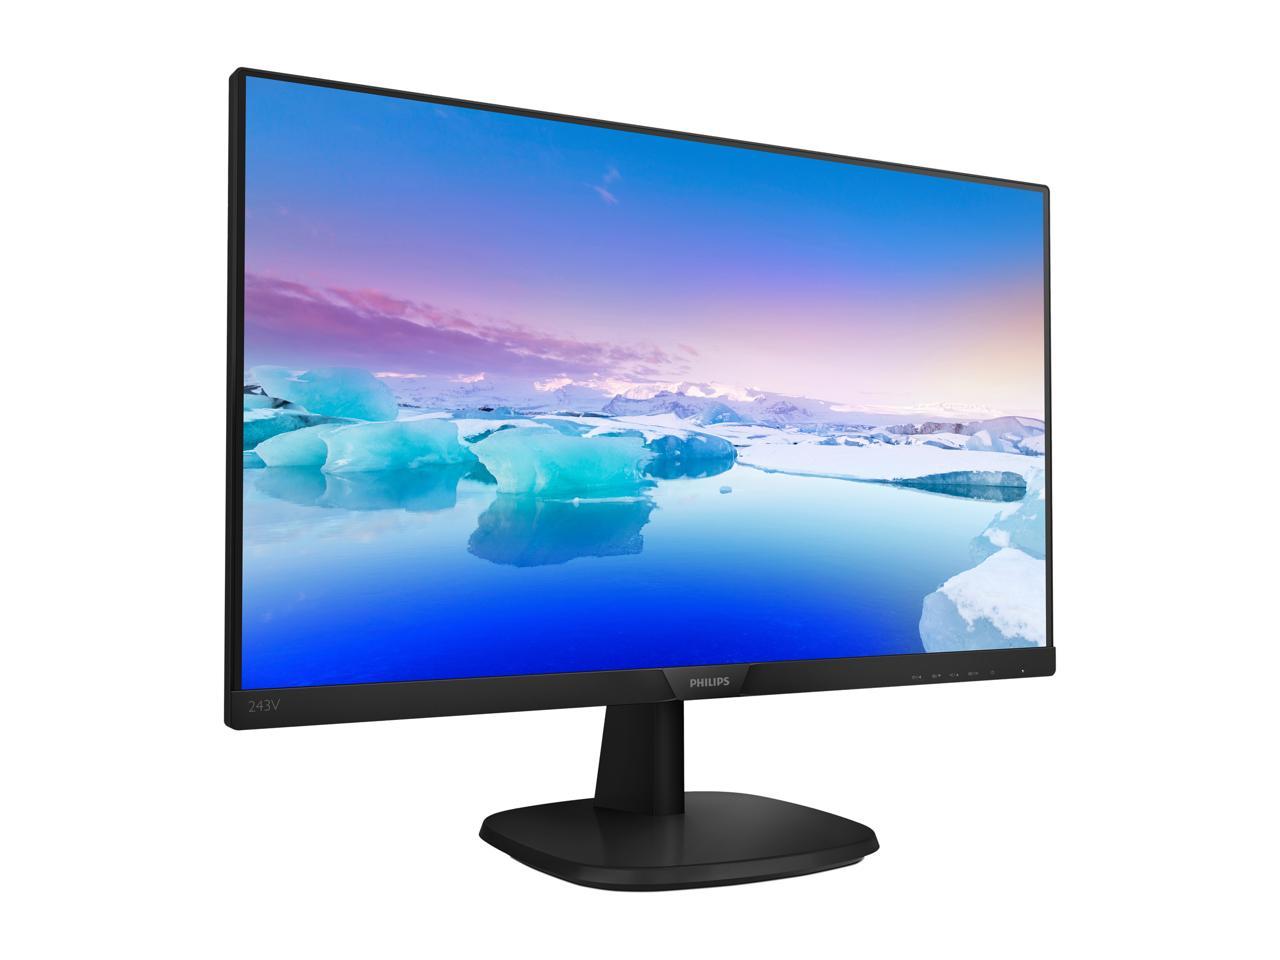 Philips 23.8" LCD Monitor with LED Backlight - image 3 of 8